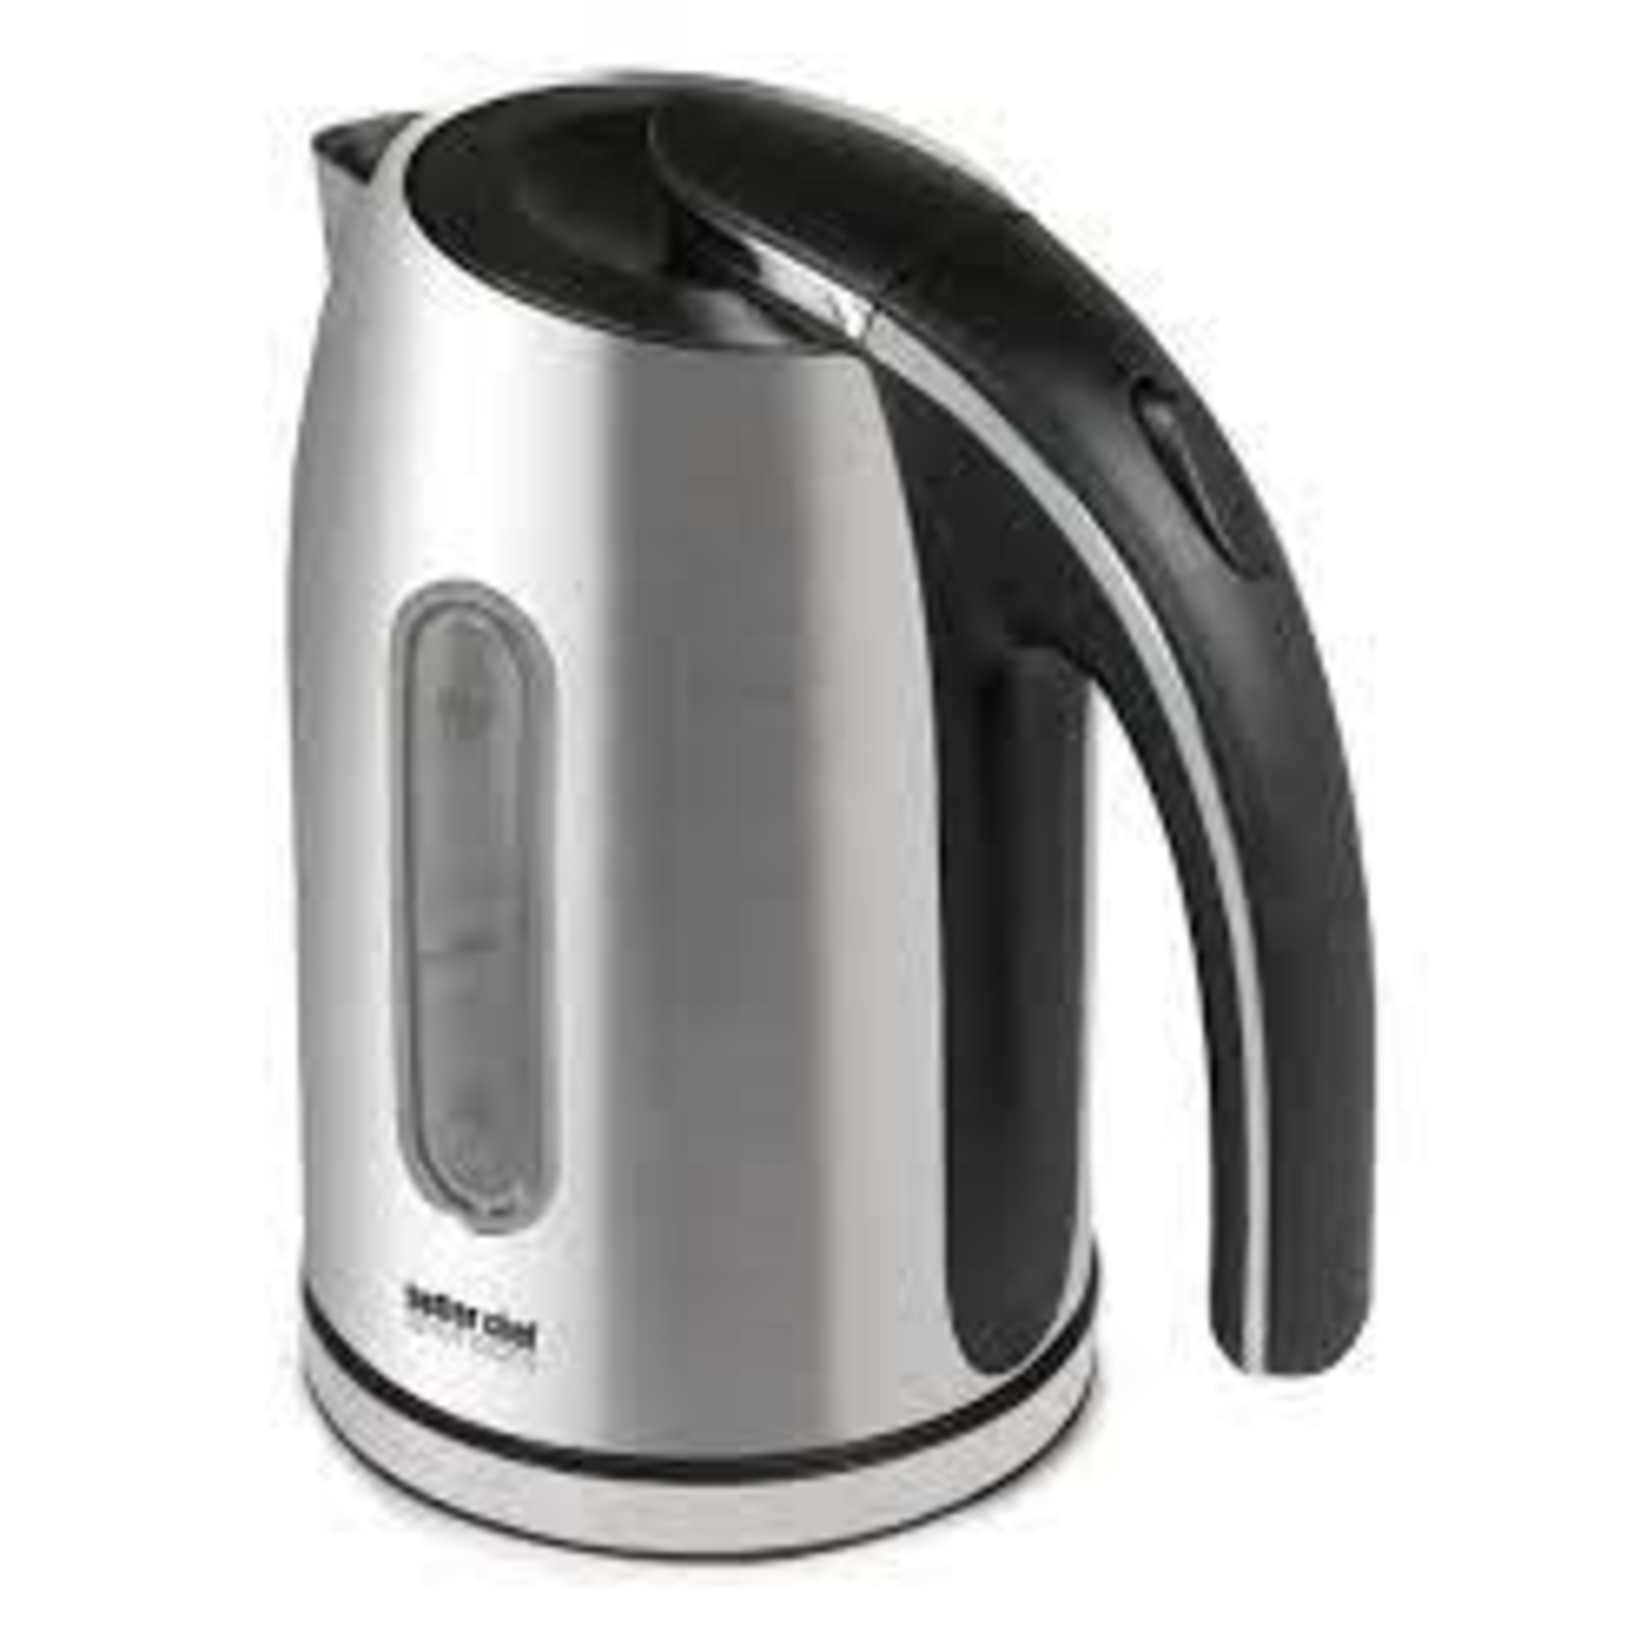 Better Chef IM-171S Better chef s/s kettle electric